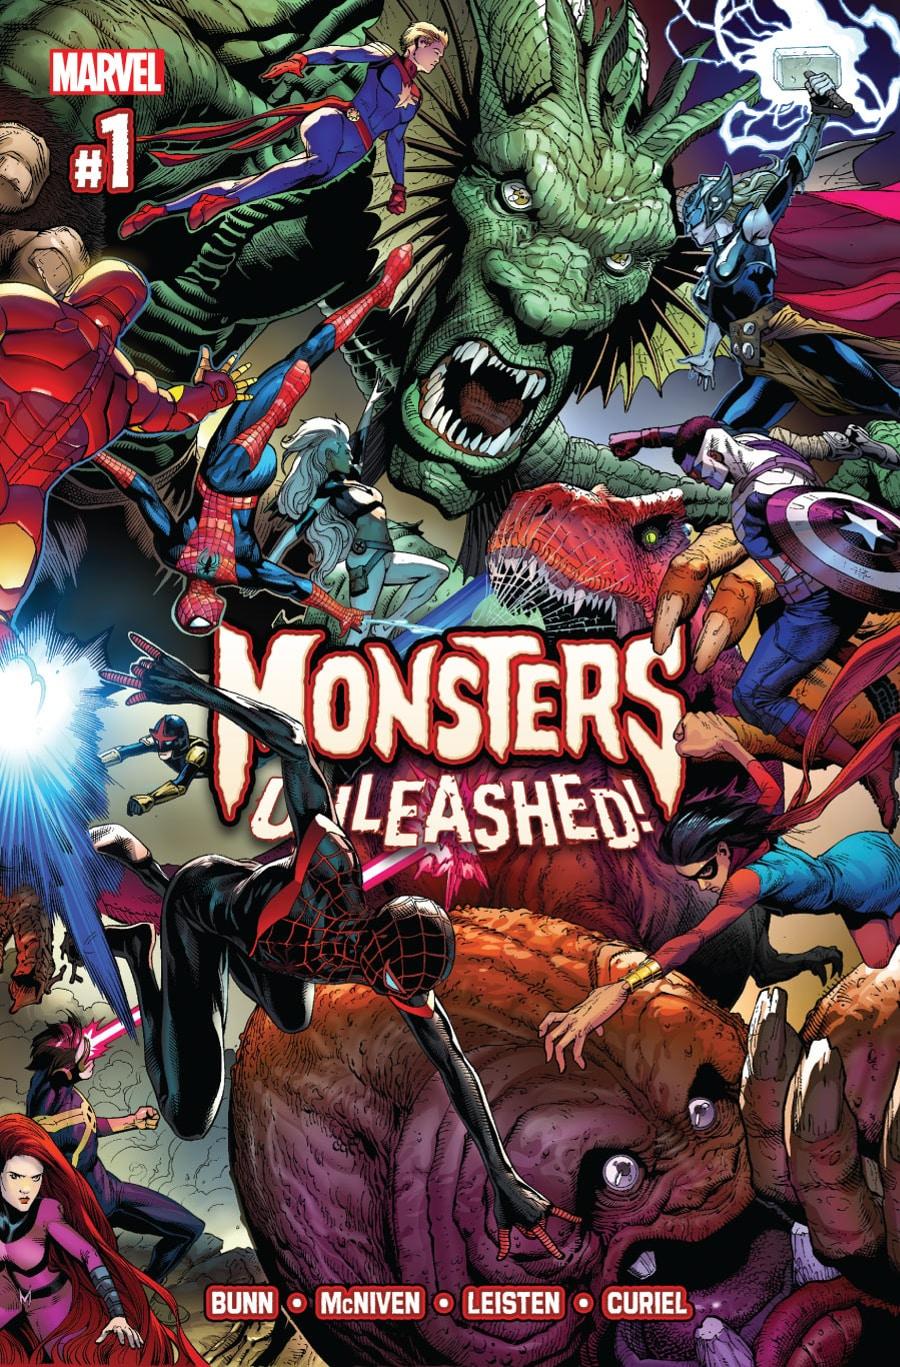 Monsters Unleashed Vol. 2 #1